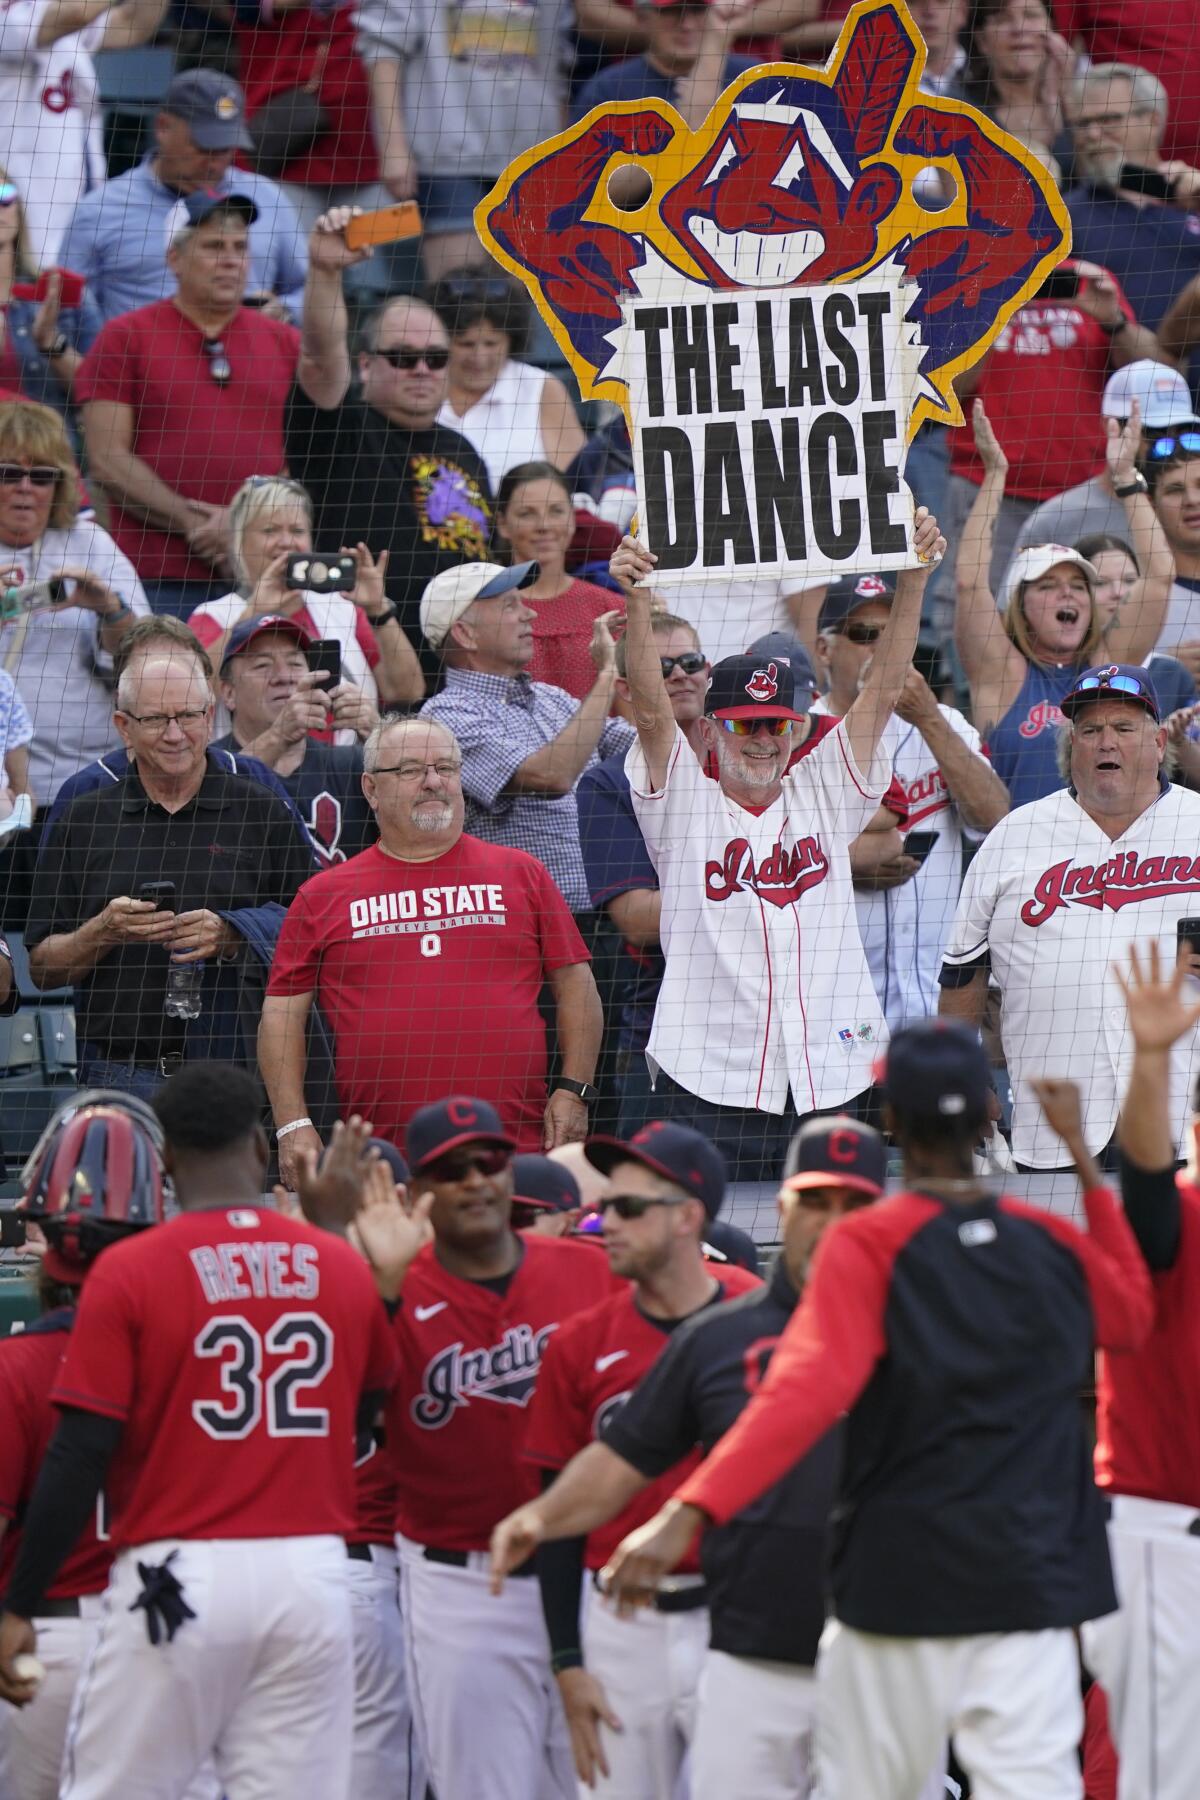 Cleveland Indians manager says it's time to change the team name